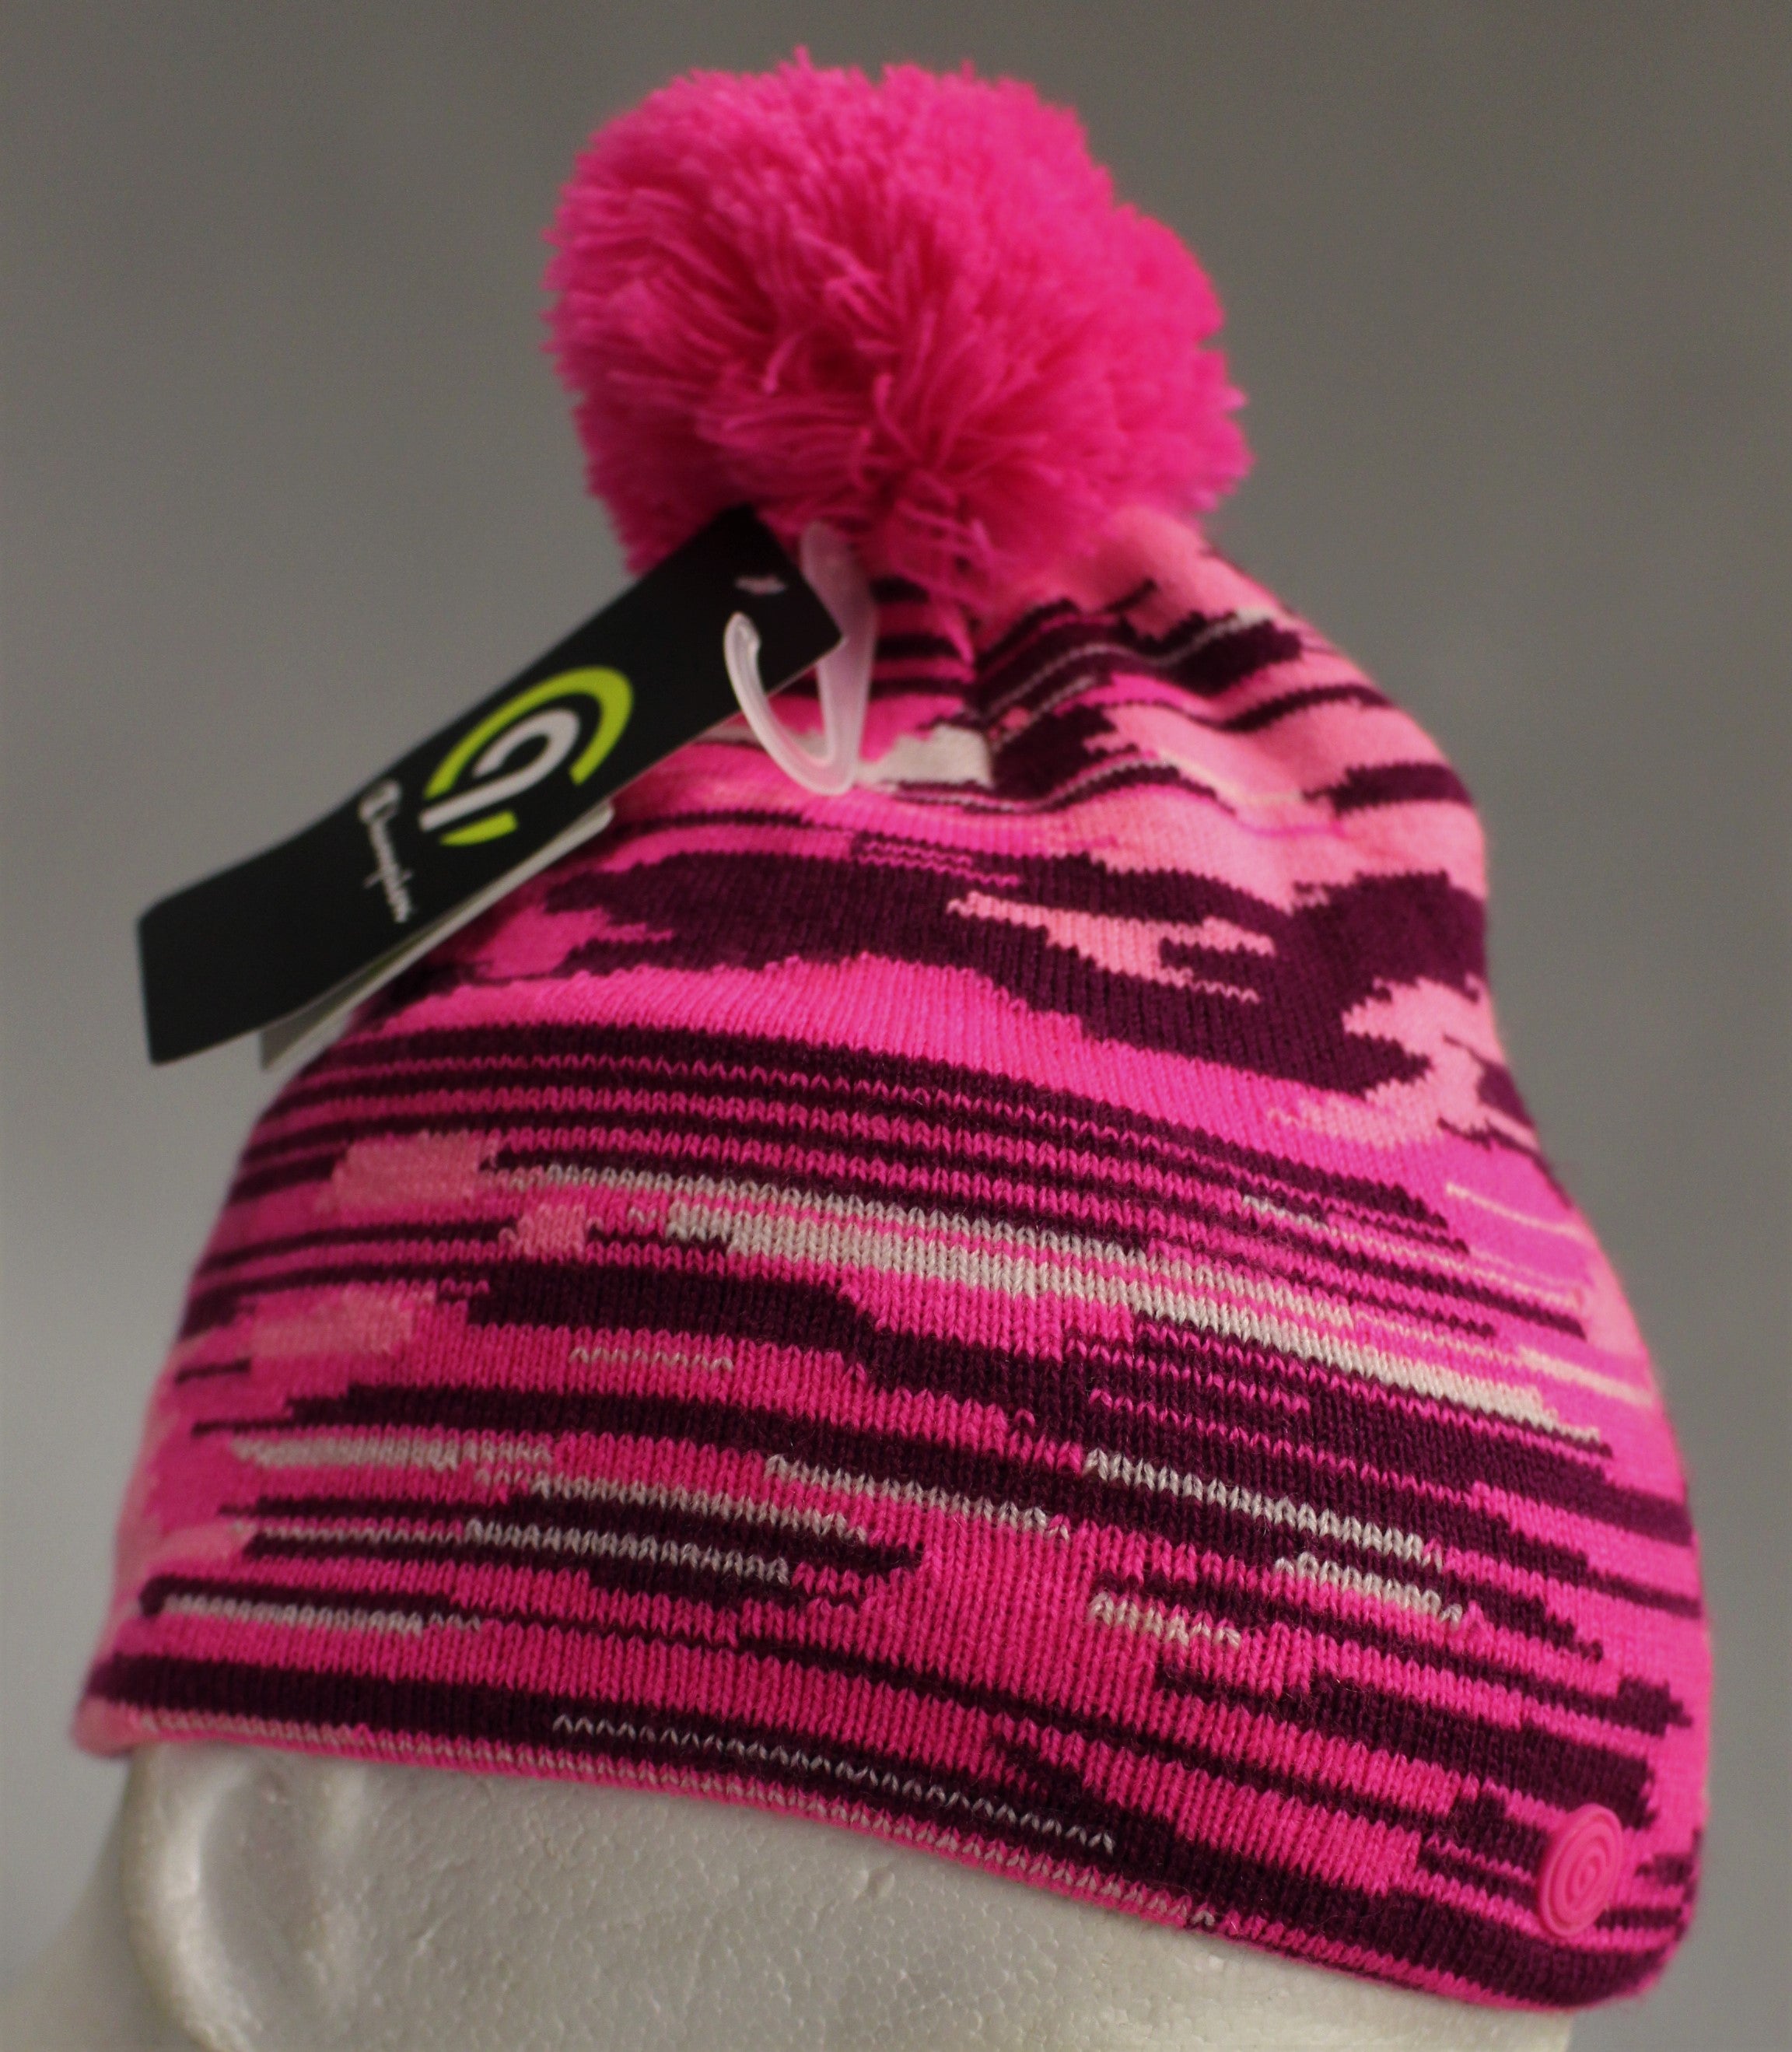 - C9 Pom One Beanie Champion Knit Pink Surplus Pattern Size with - – Girls\' and Military Steals Ne -